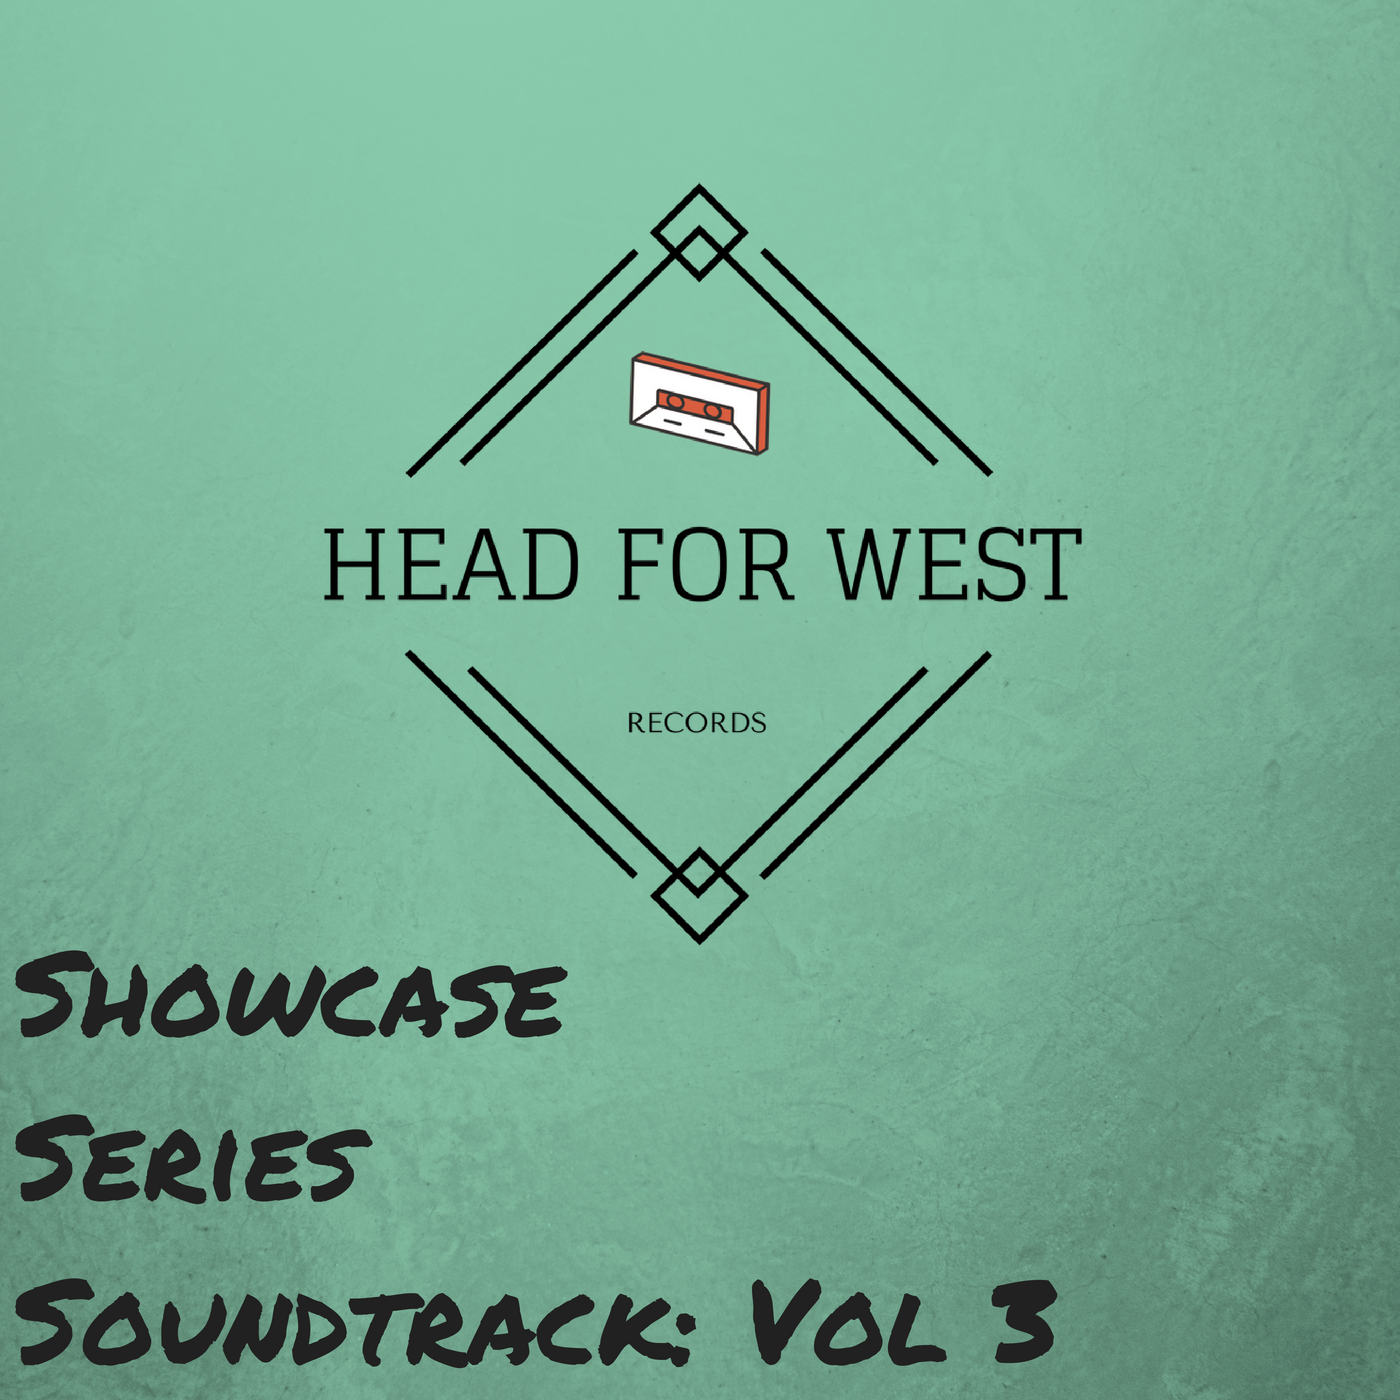 ShowcaseSeriesSoundtrack_ Vol 3.png